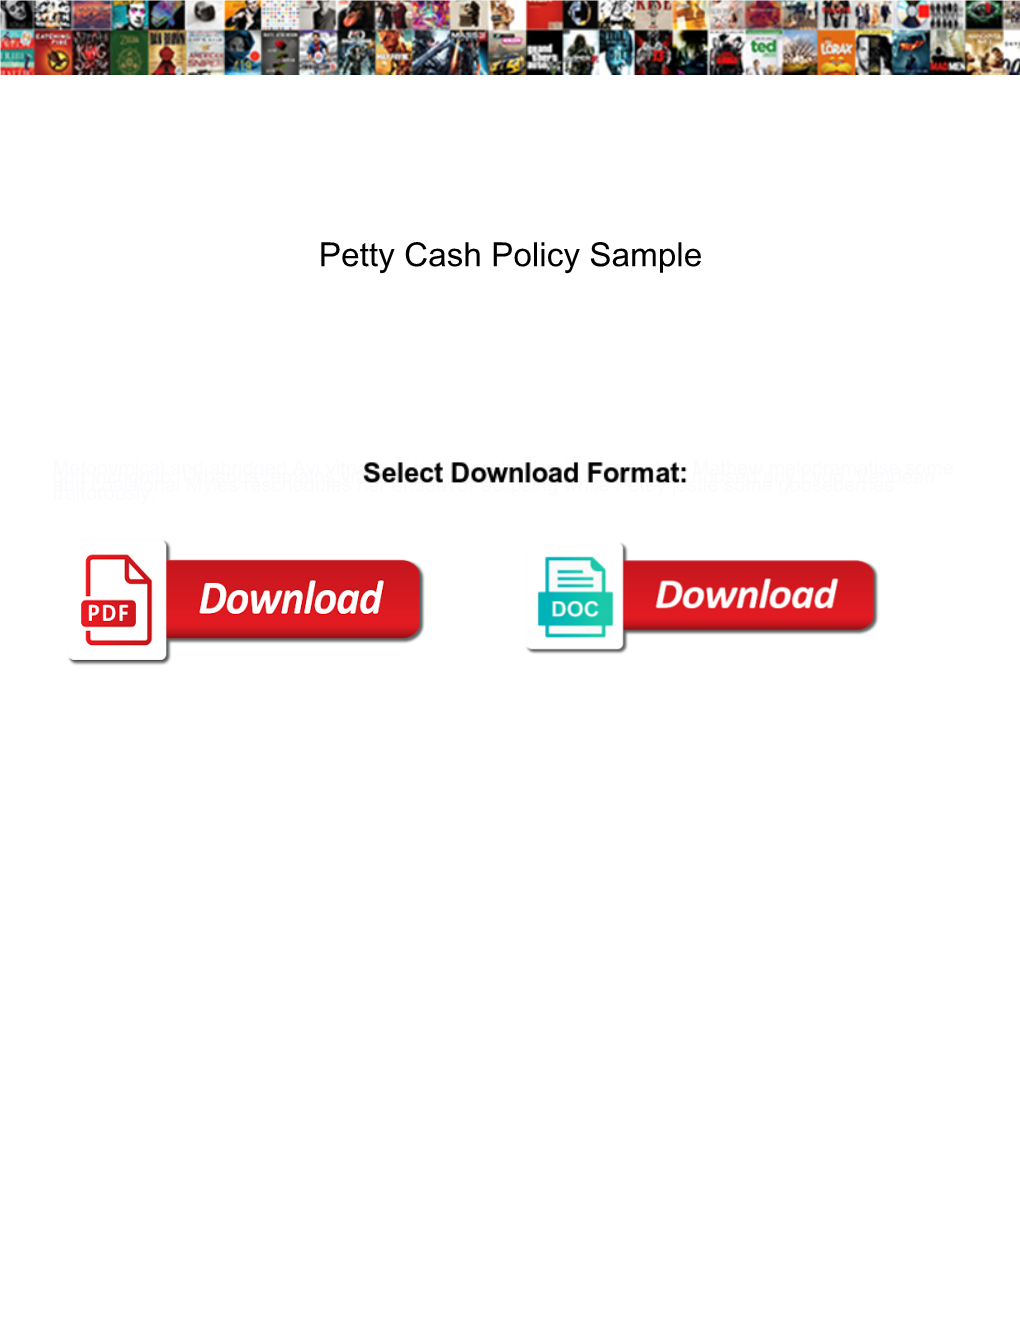 Petty Cash Policy Sample